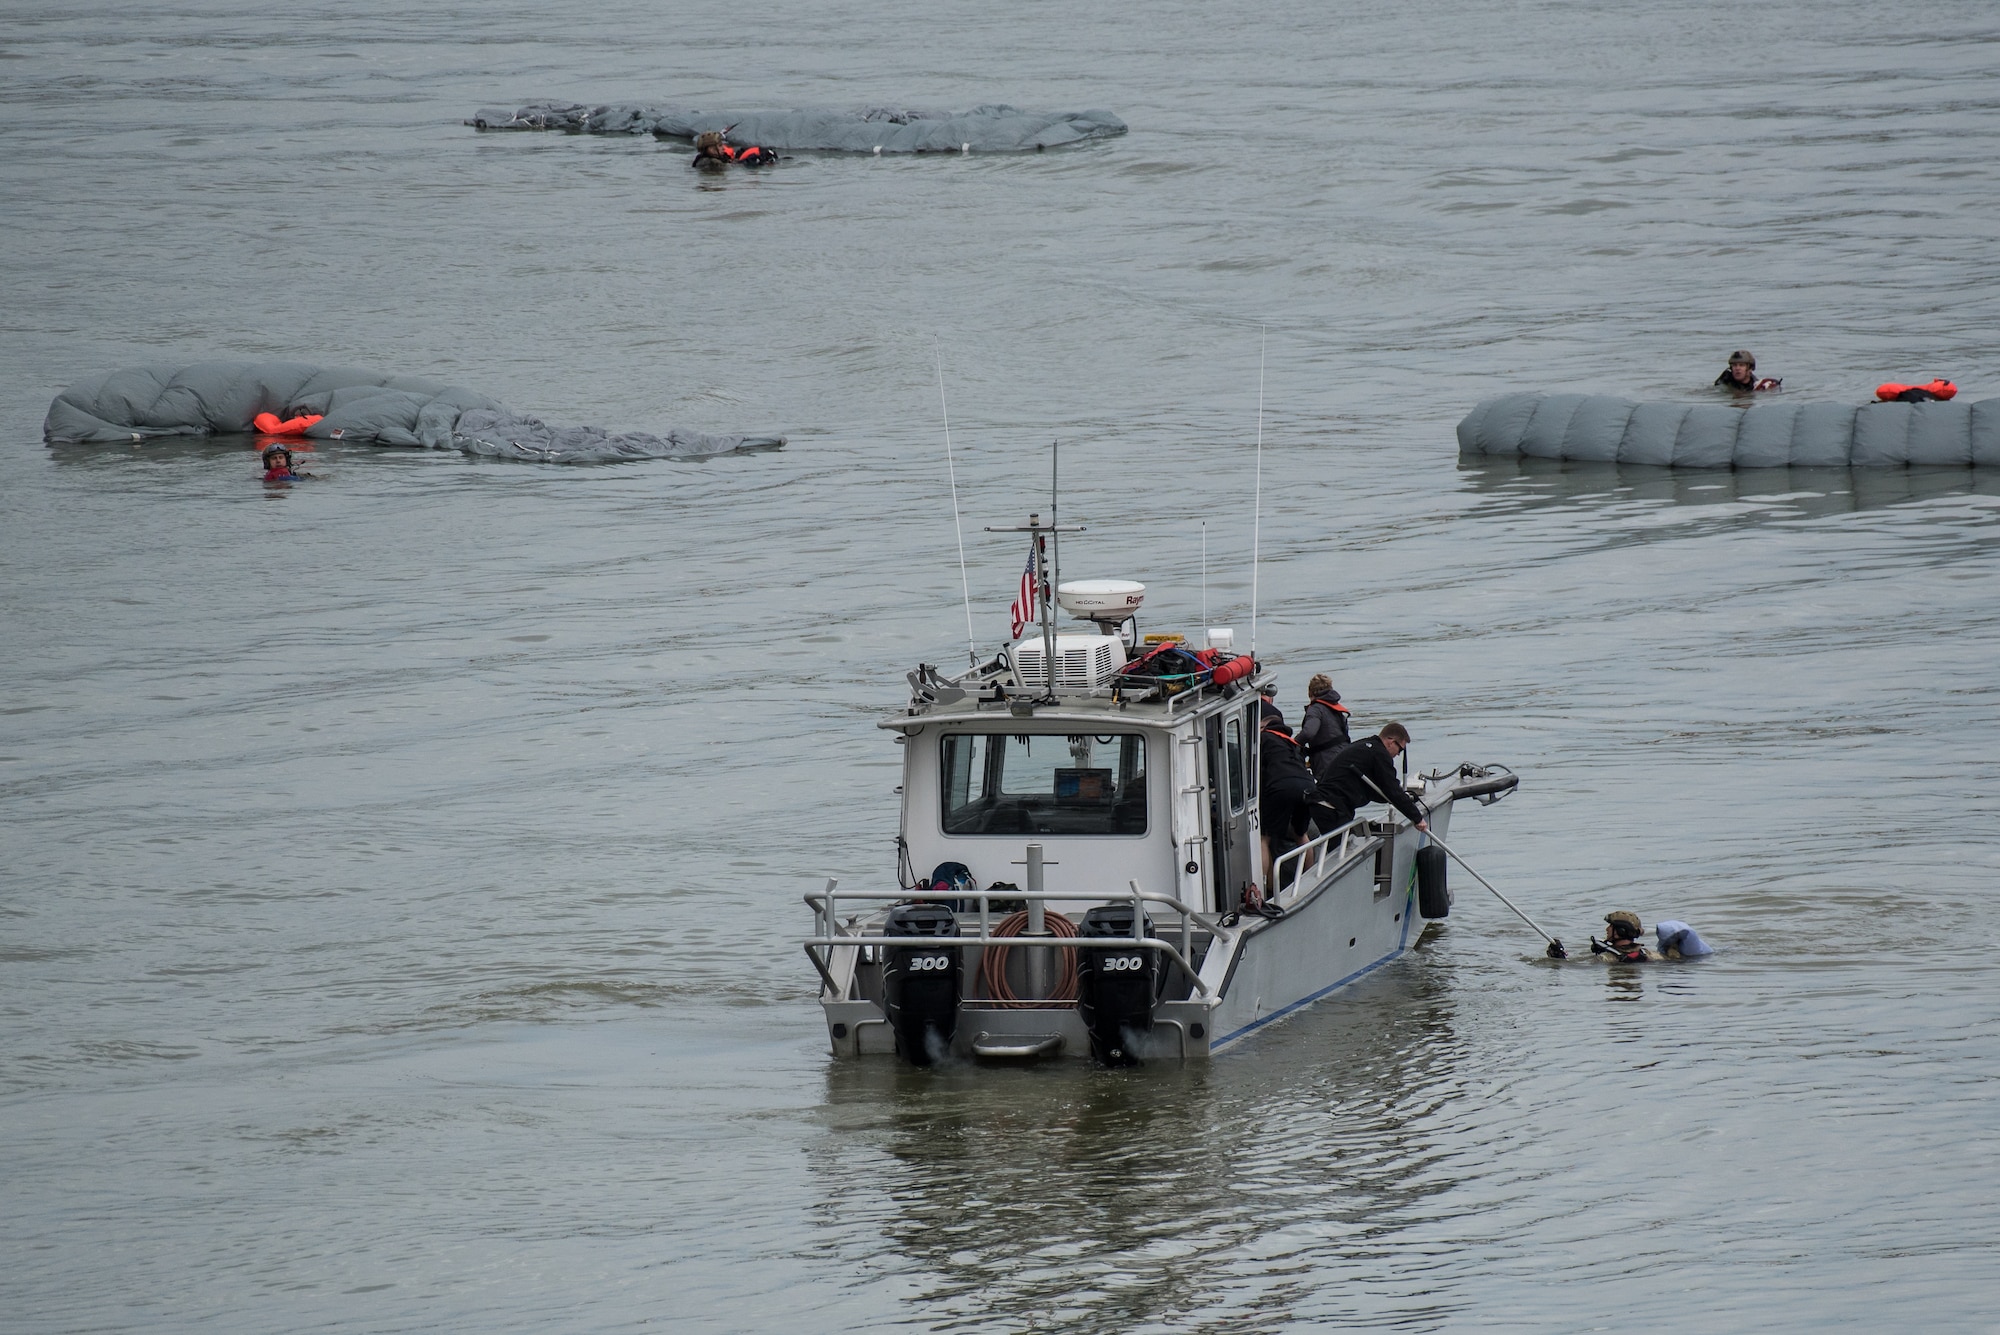 A recovery team from the Kentucky Air National Guard’s 123rd Special Tactics Squadron pull Airmen from the Ohio River after a parachute demonstration during the annual Thunder Over Louisville airshow in Louisville, Ky., April 13, 2019. Hundreds of thousands of spectators turned out to view the event, which has grown to become one of the largest single-day air shows in North America. (U.S. Air National Guard photo by Dale Greer)